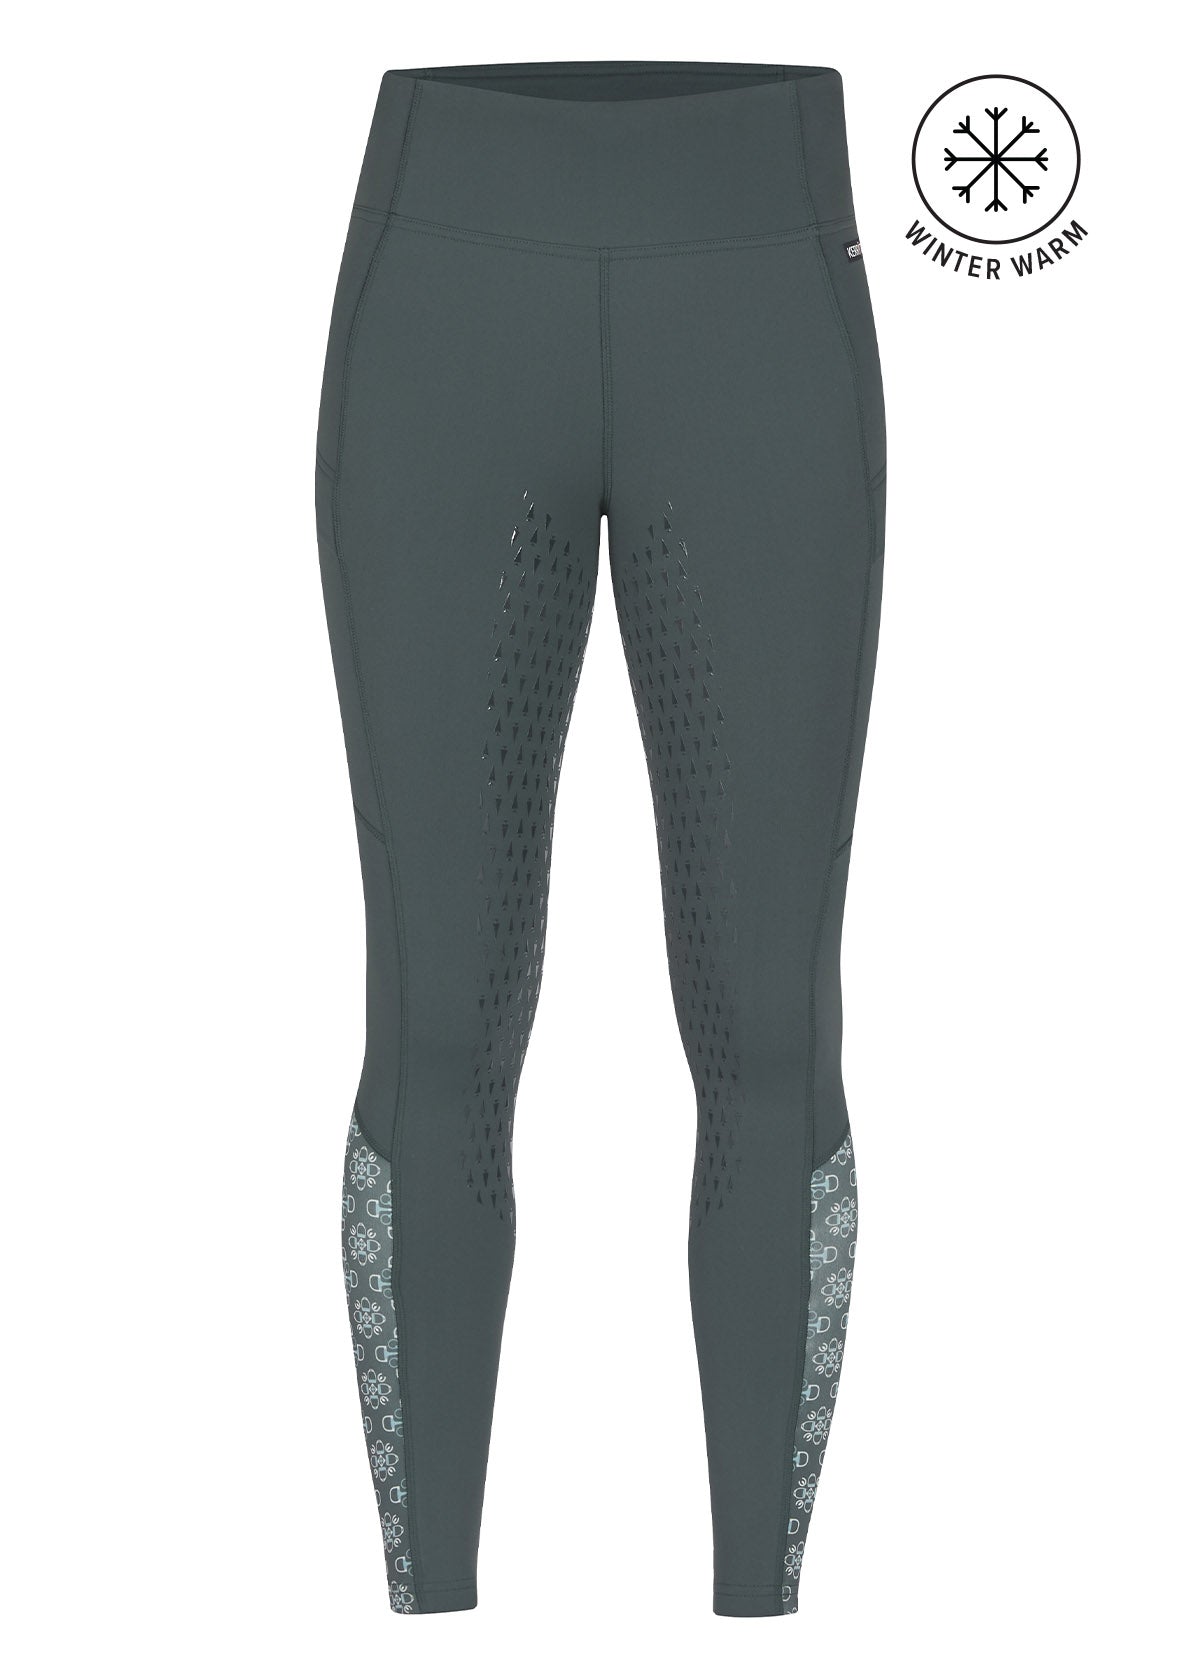 Kerrits Thermo Tech Full Leg Tight - Extra Small / Spruce/Spruce Bit of  Frost